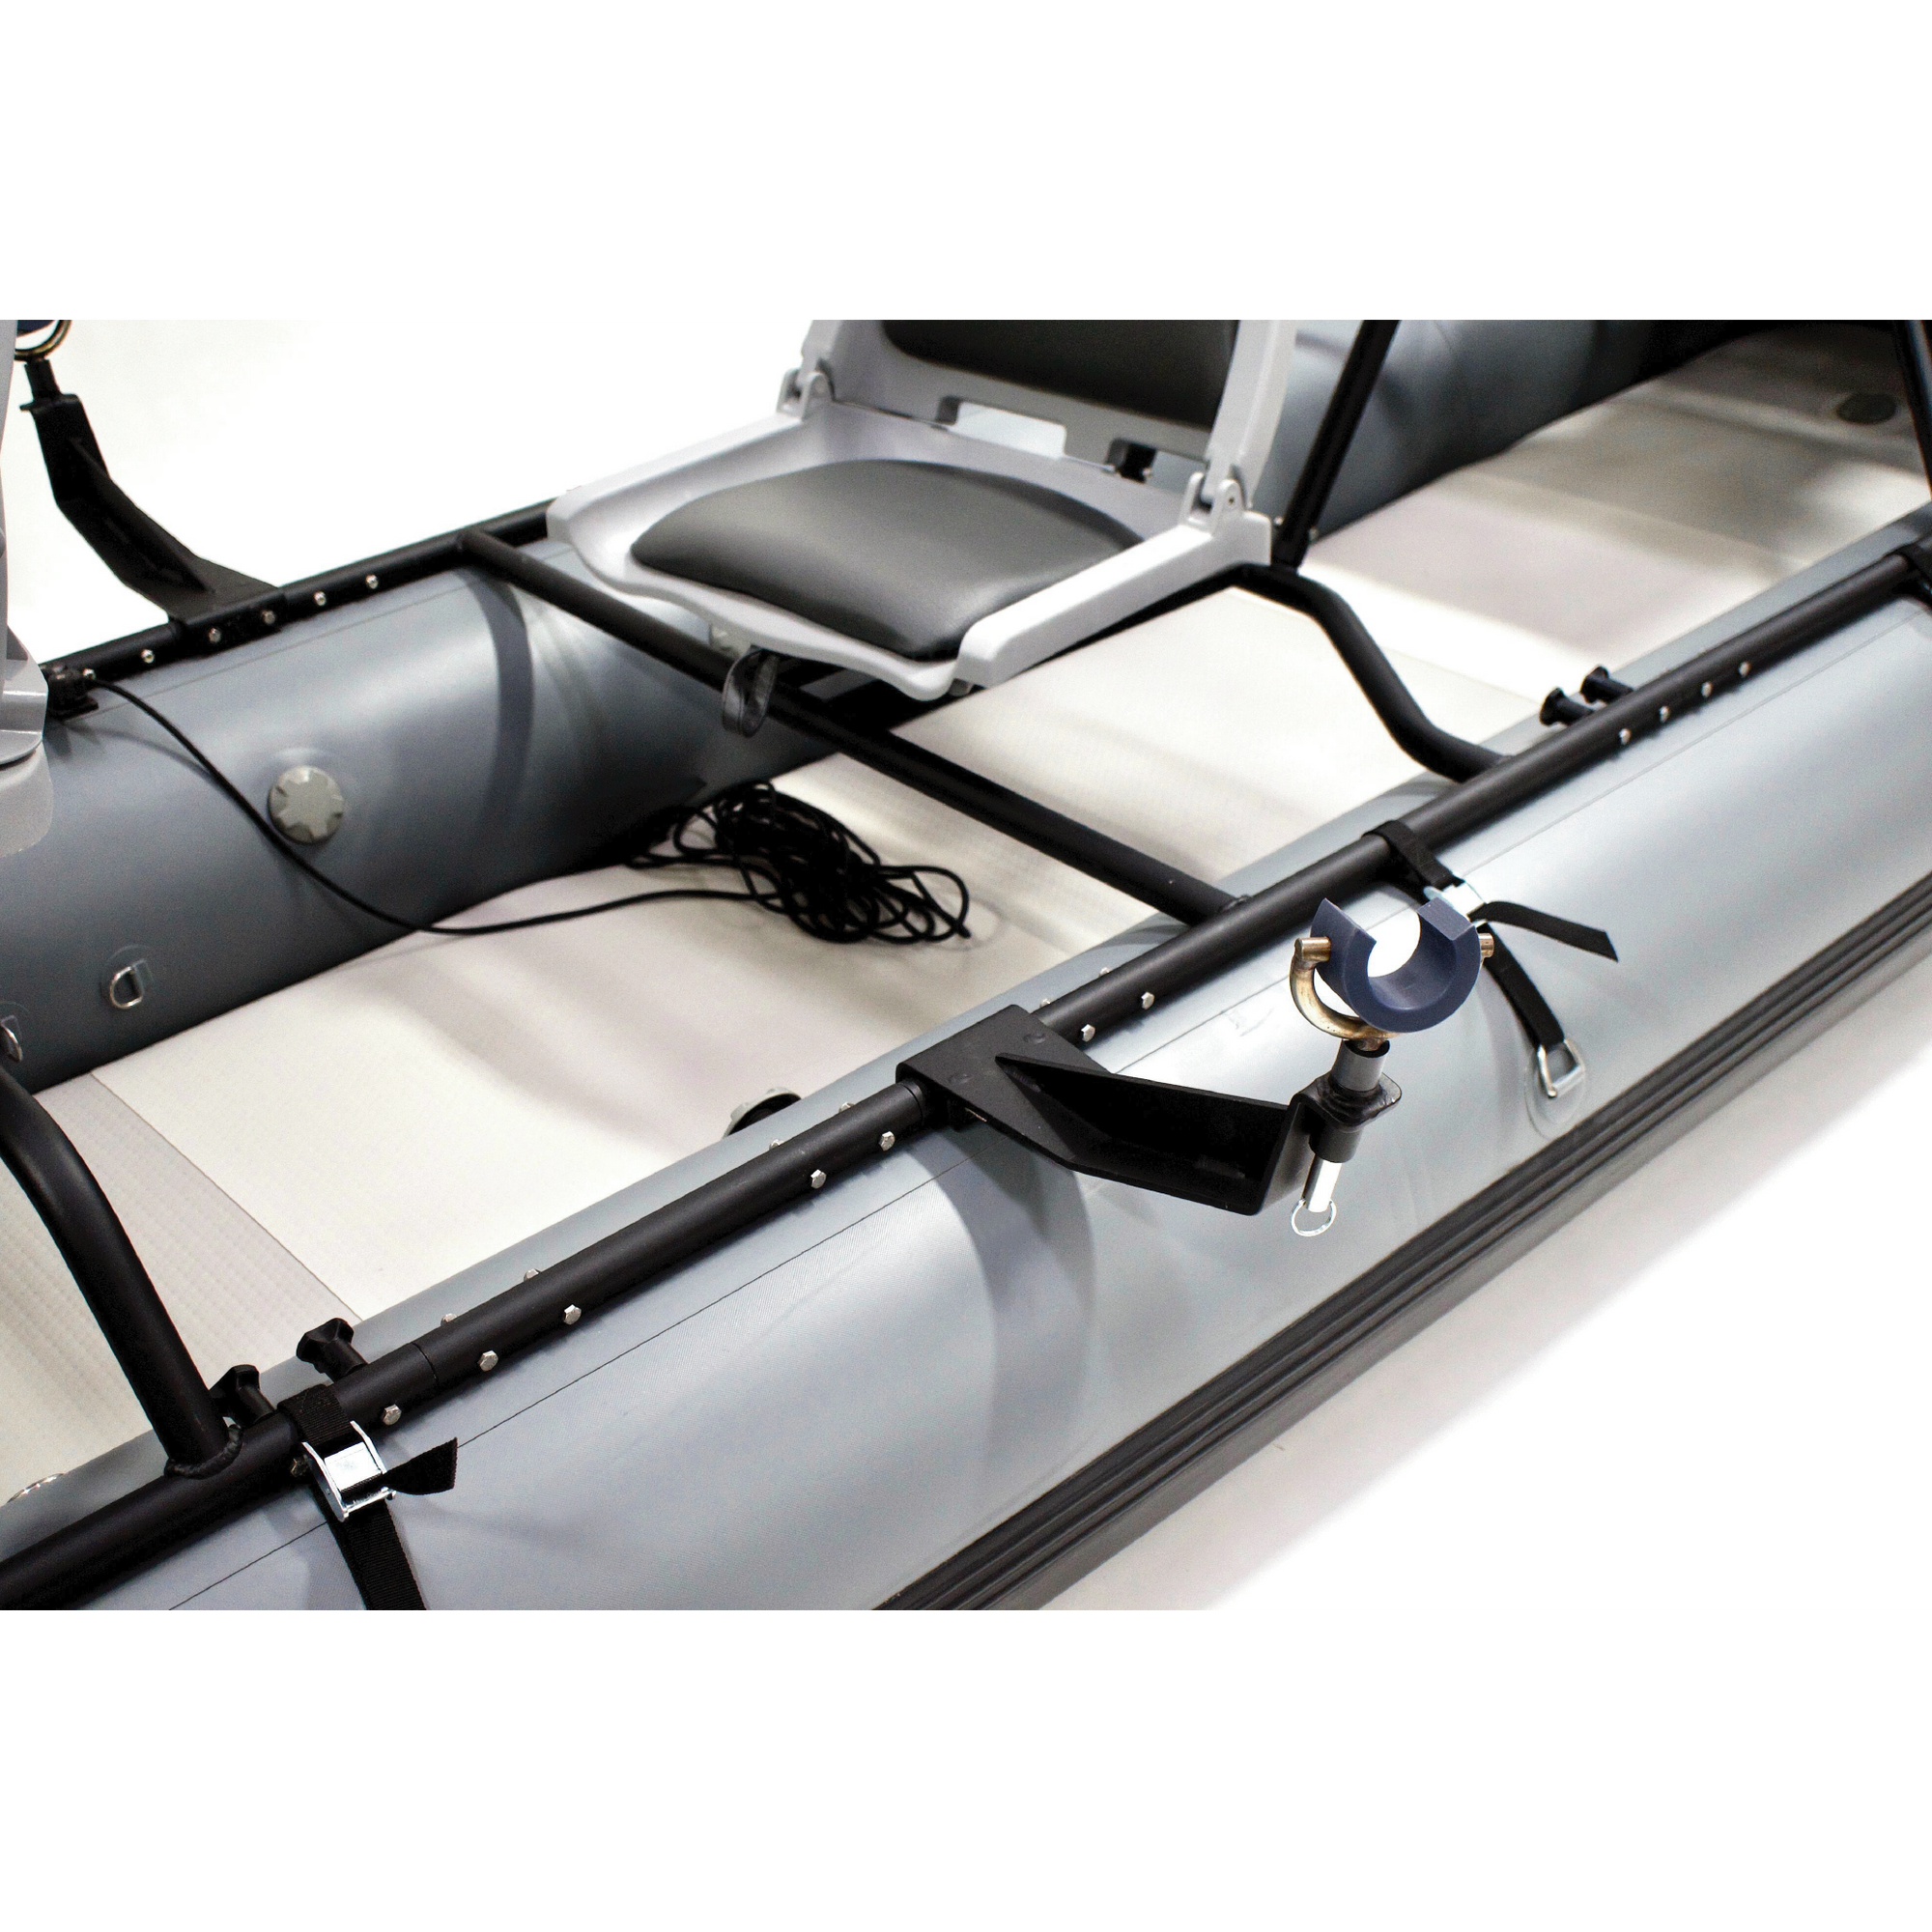 Flycraft’s Inflatable Fishing Boat: Guide Pro Package (3-Man)